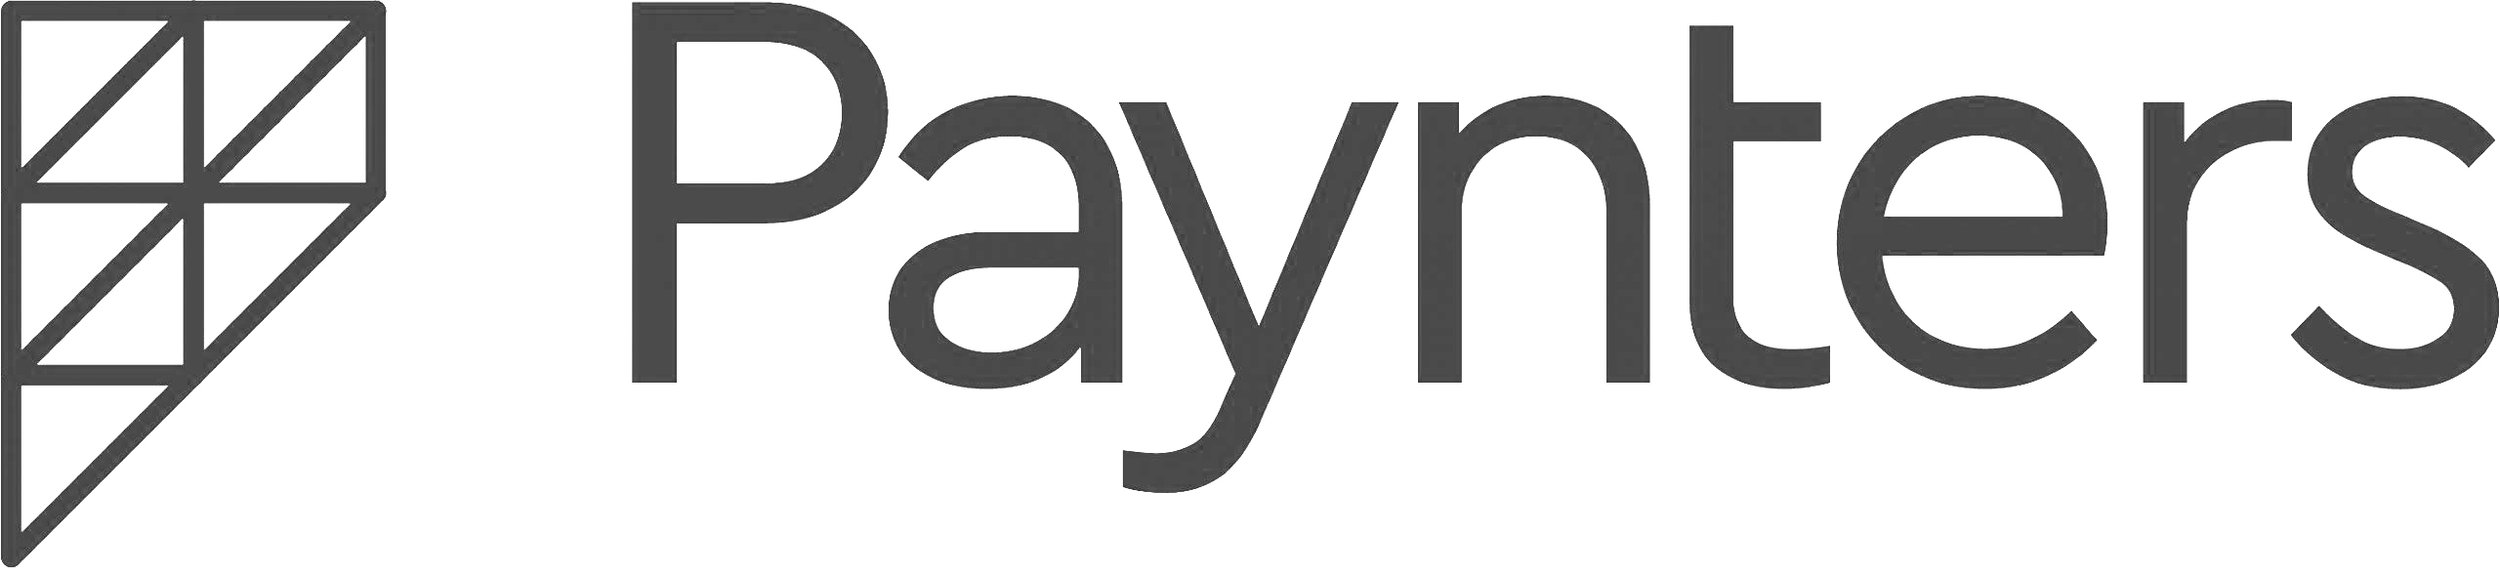 Client logo - Paynters